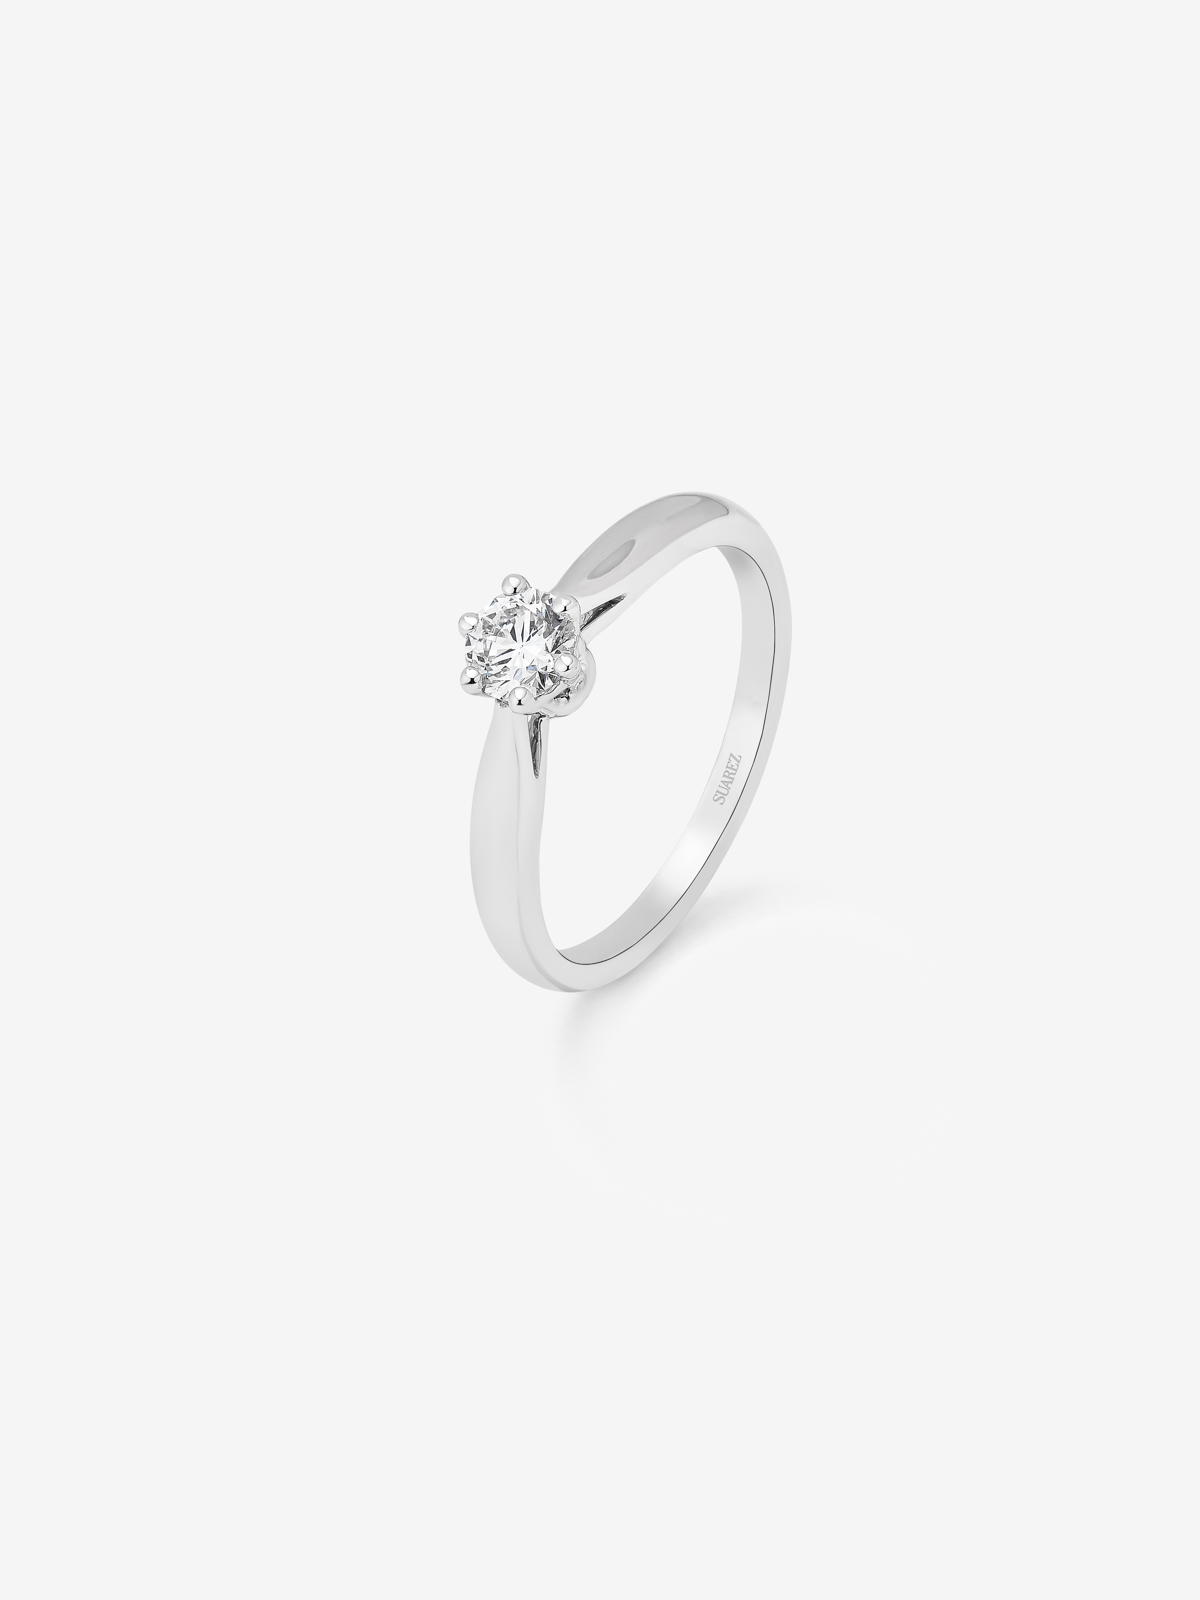 18K white gold solitary ring with white diamond in 0.2 cts